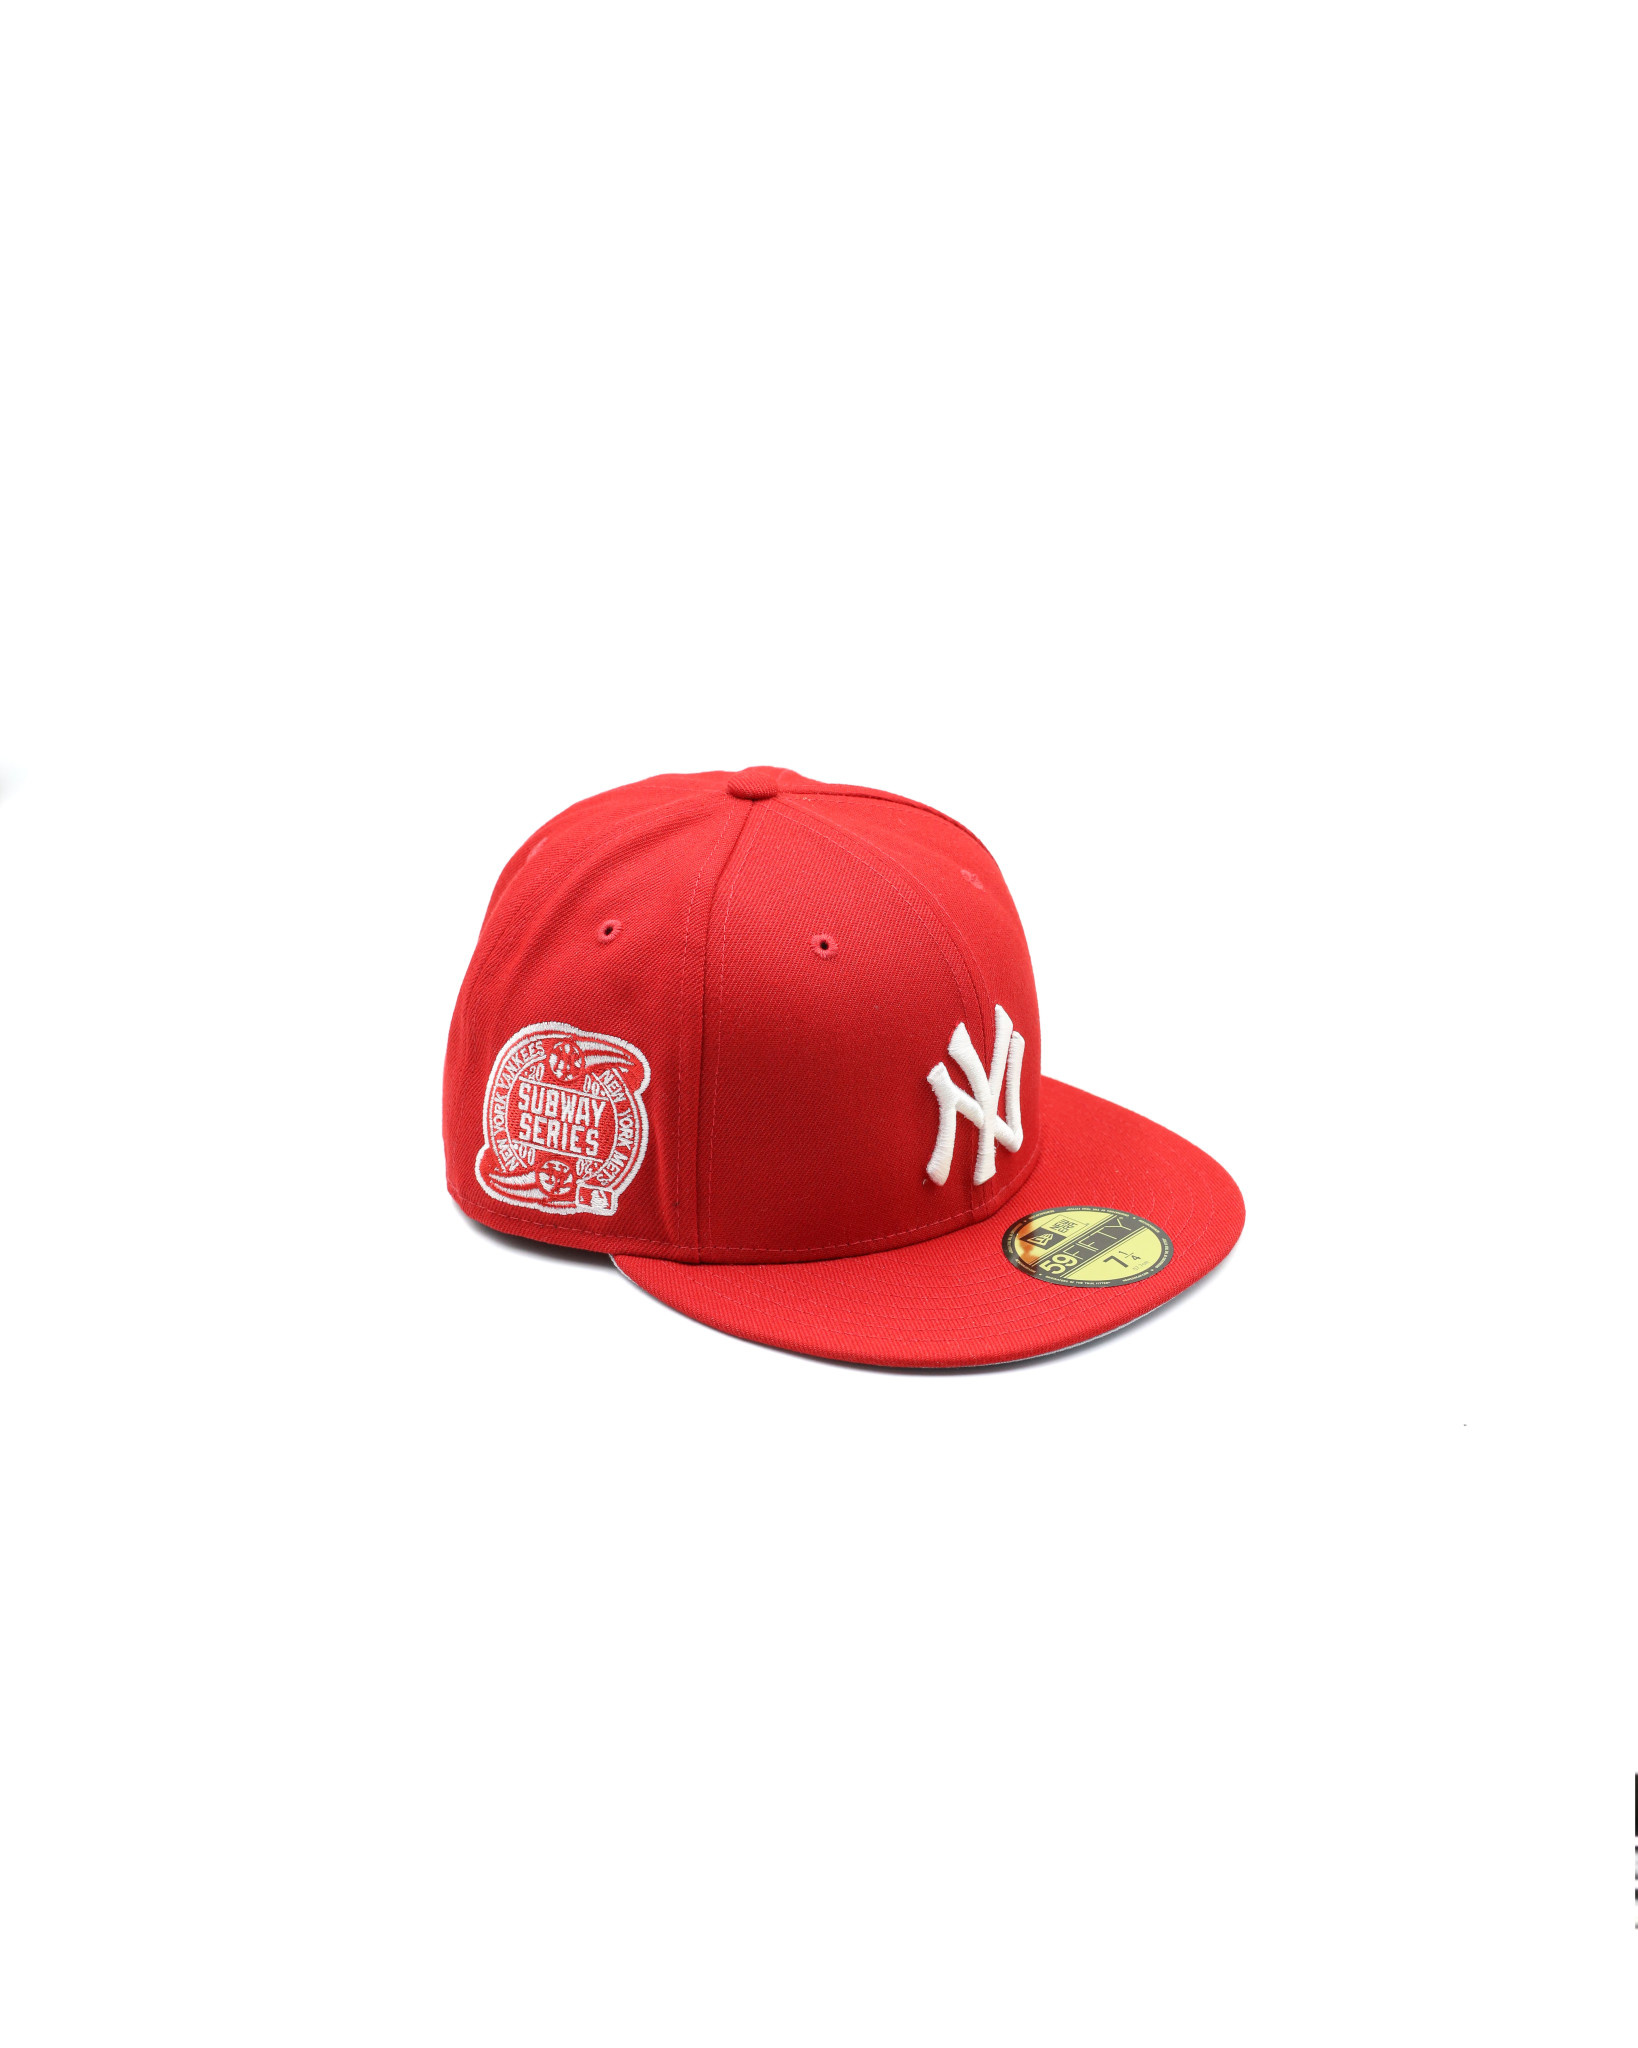 New Era 59Fifty New York Yankees Fitted Hat Scarlet Red White